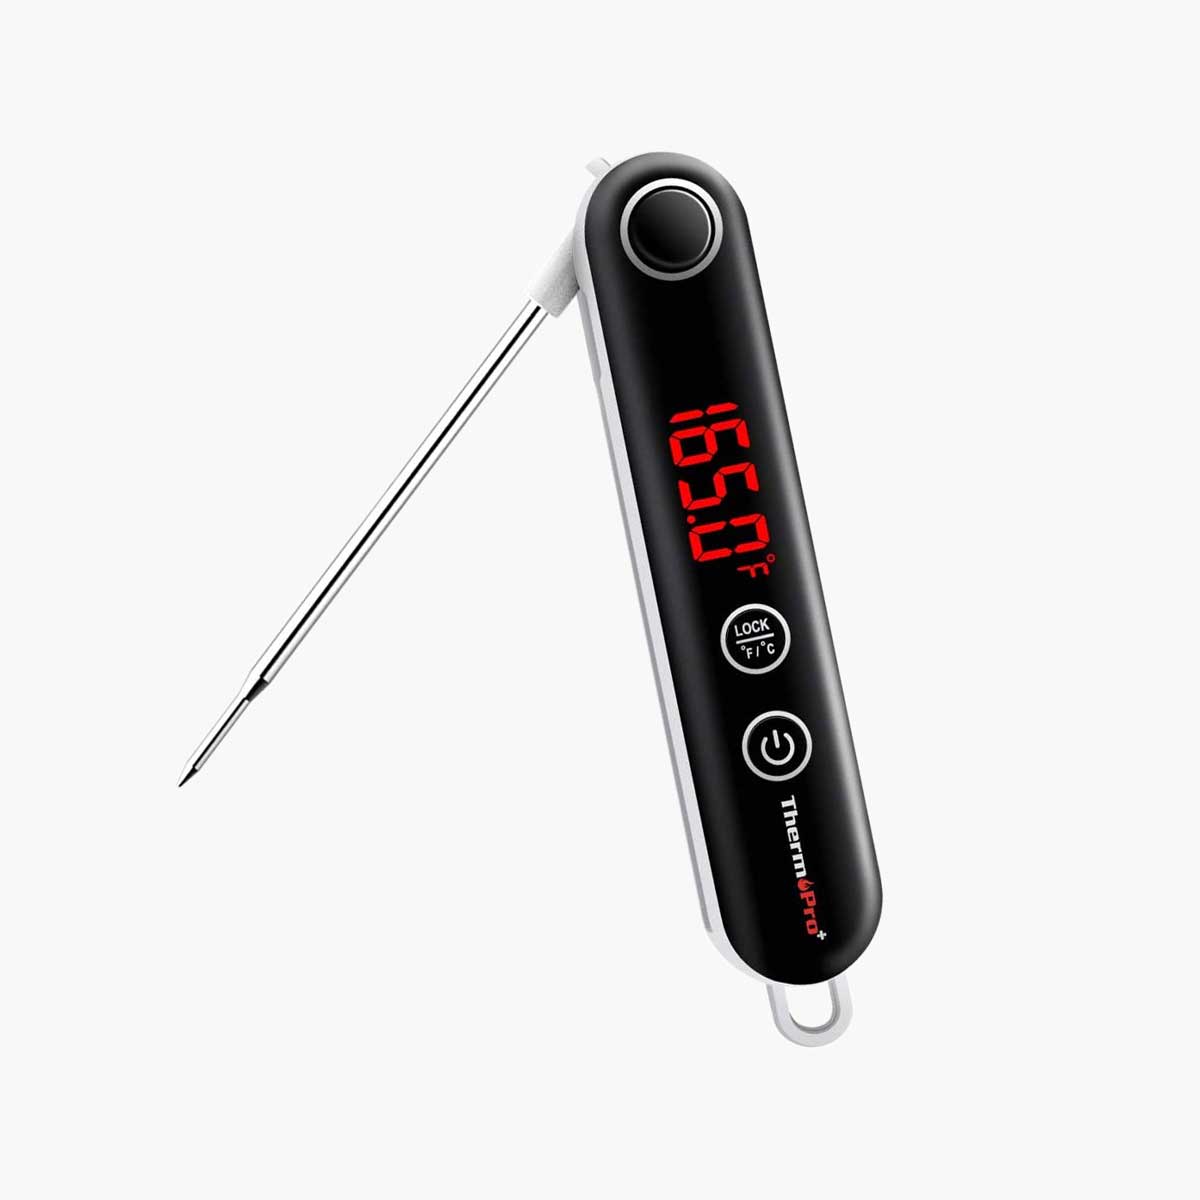 A black ThermoPro instant read thermometer.